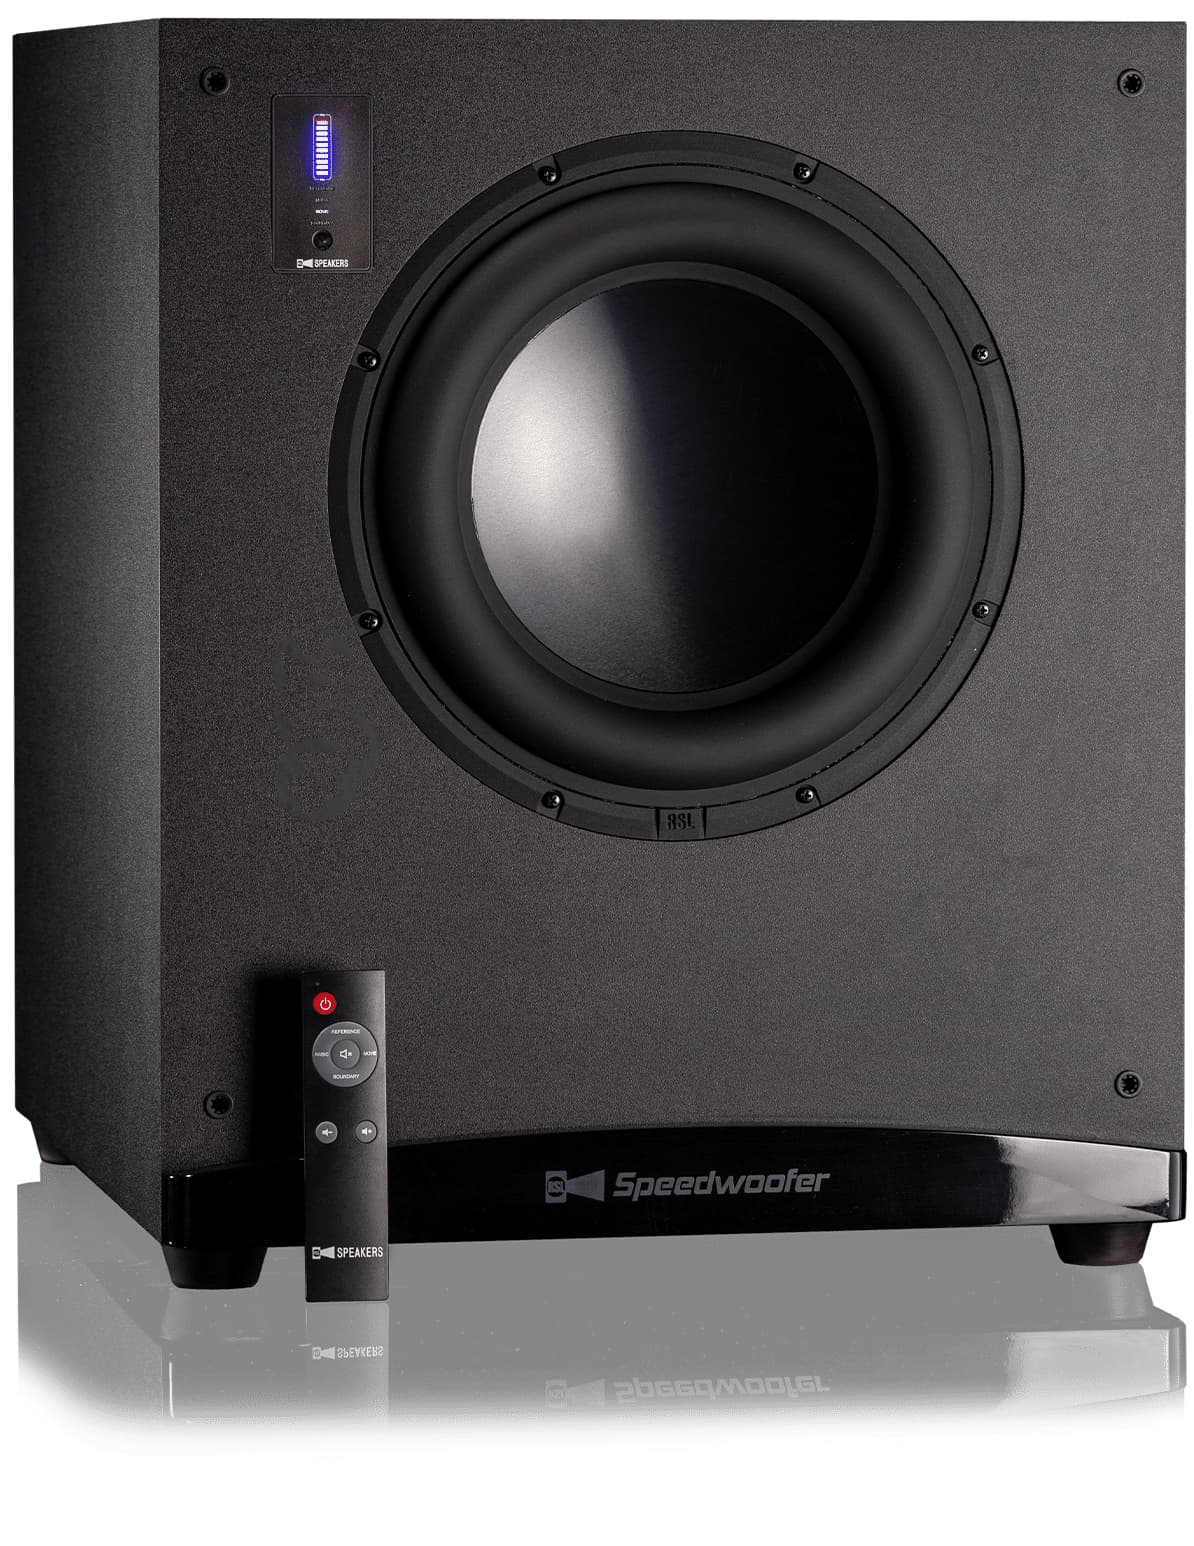 RSL Speakers Speedwoofer 12S Subwoofer Front Angle No Grille with Remote Control